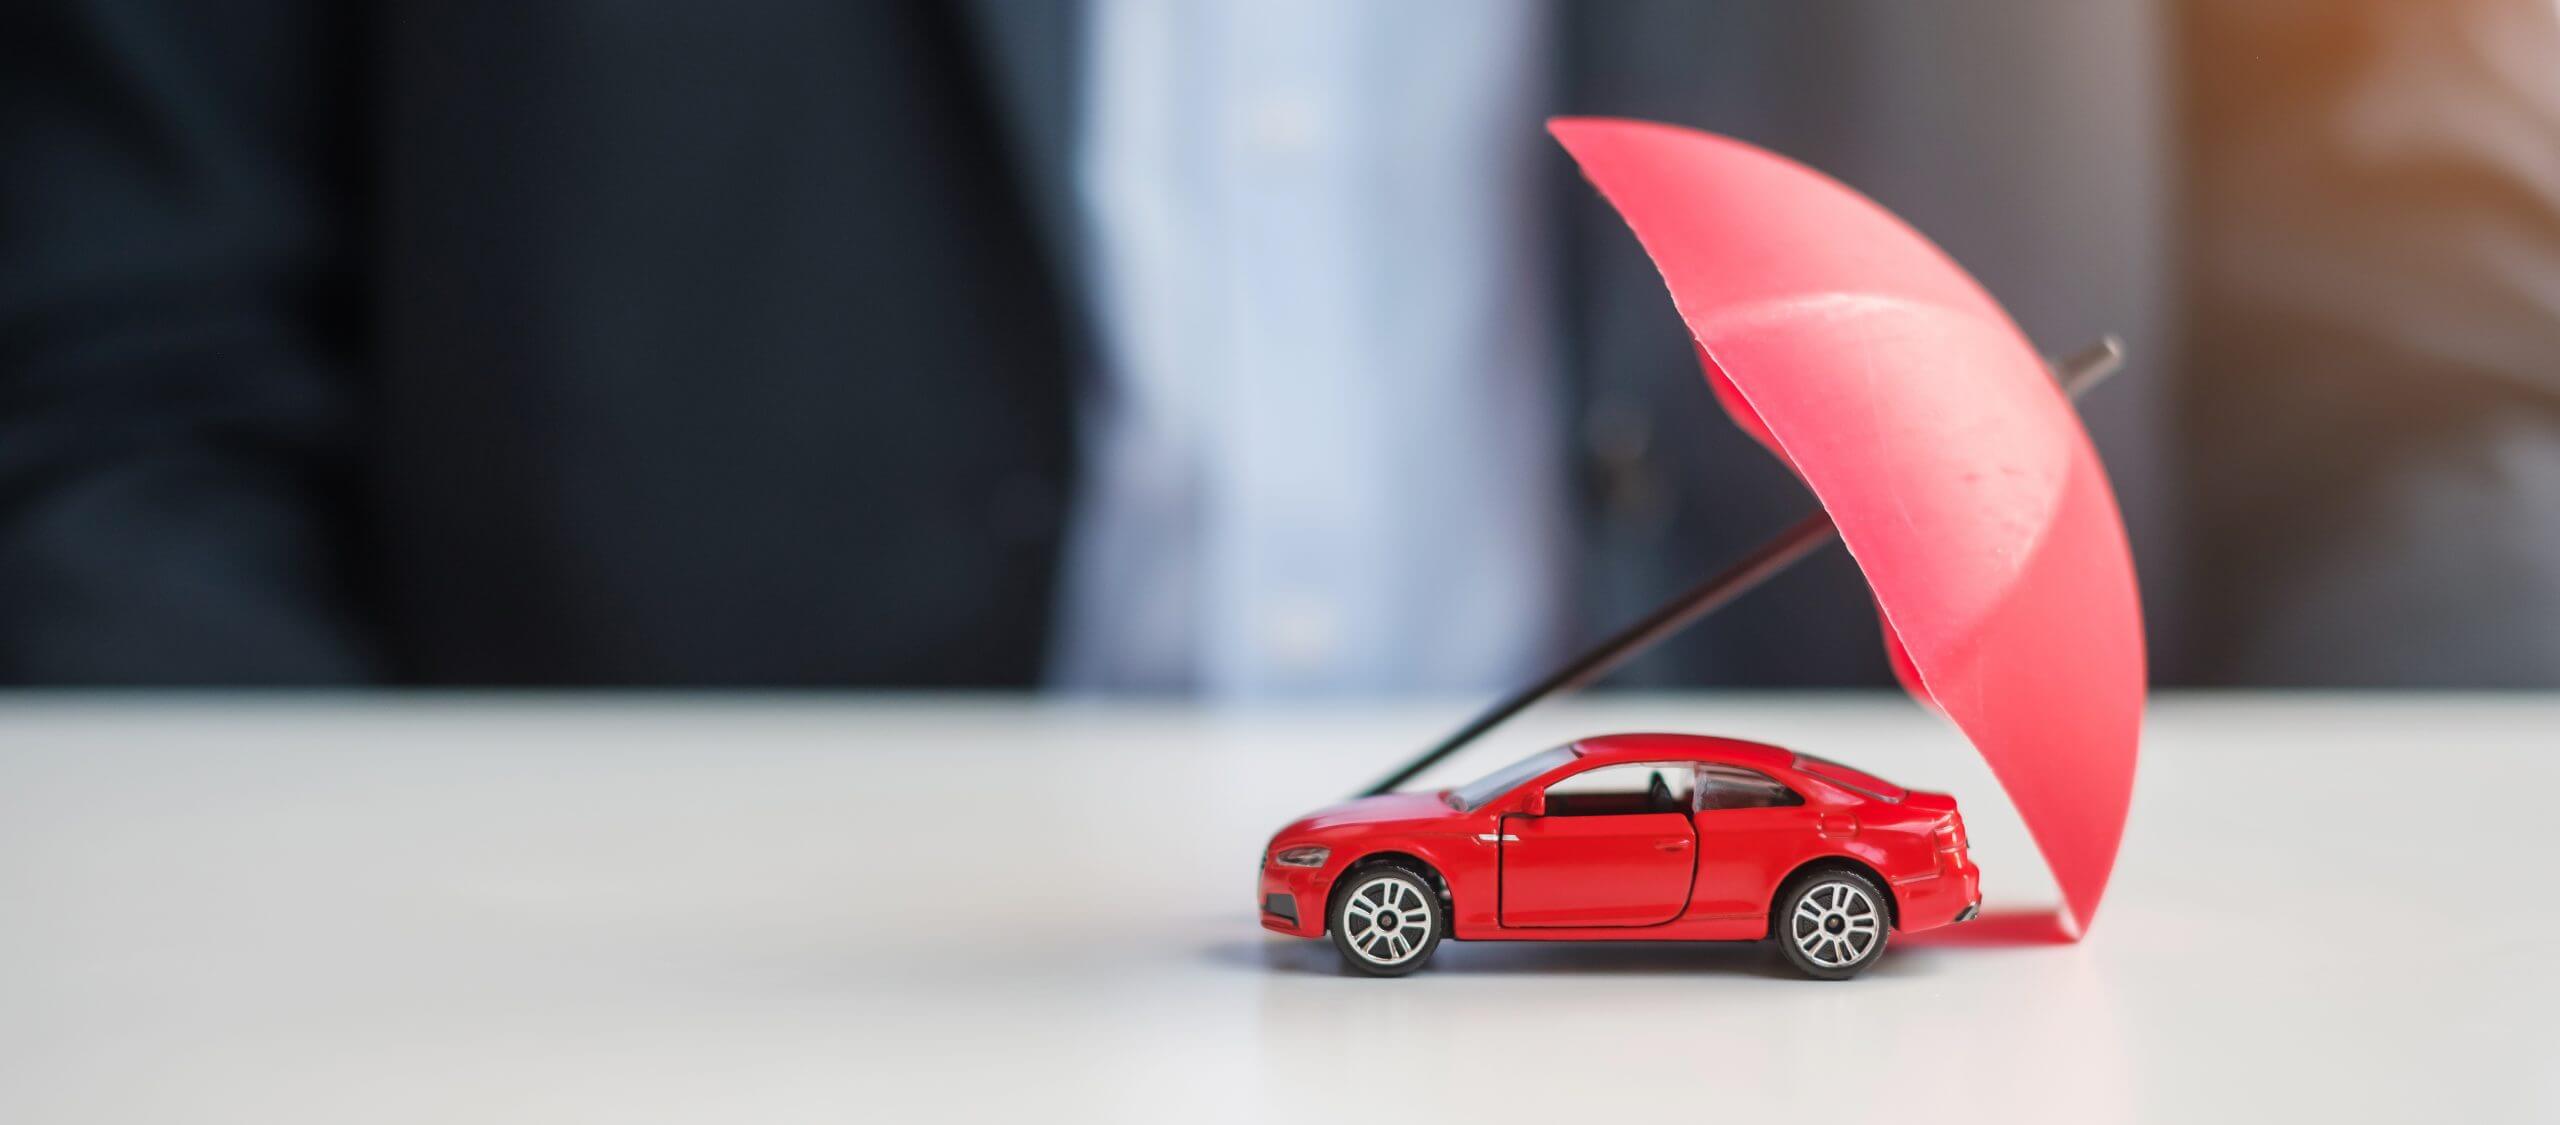 Businessman hand holding umbrella and cover  red car toy on table. Car insurance, warranty, repair, Financial, banking and money concept